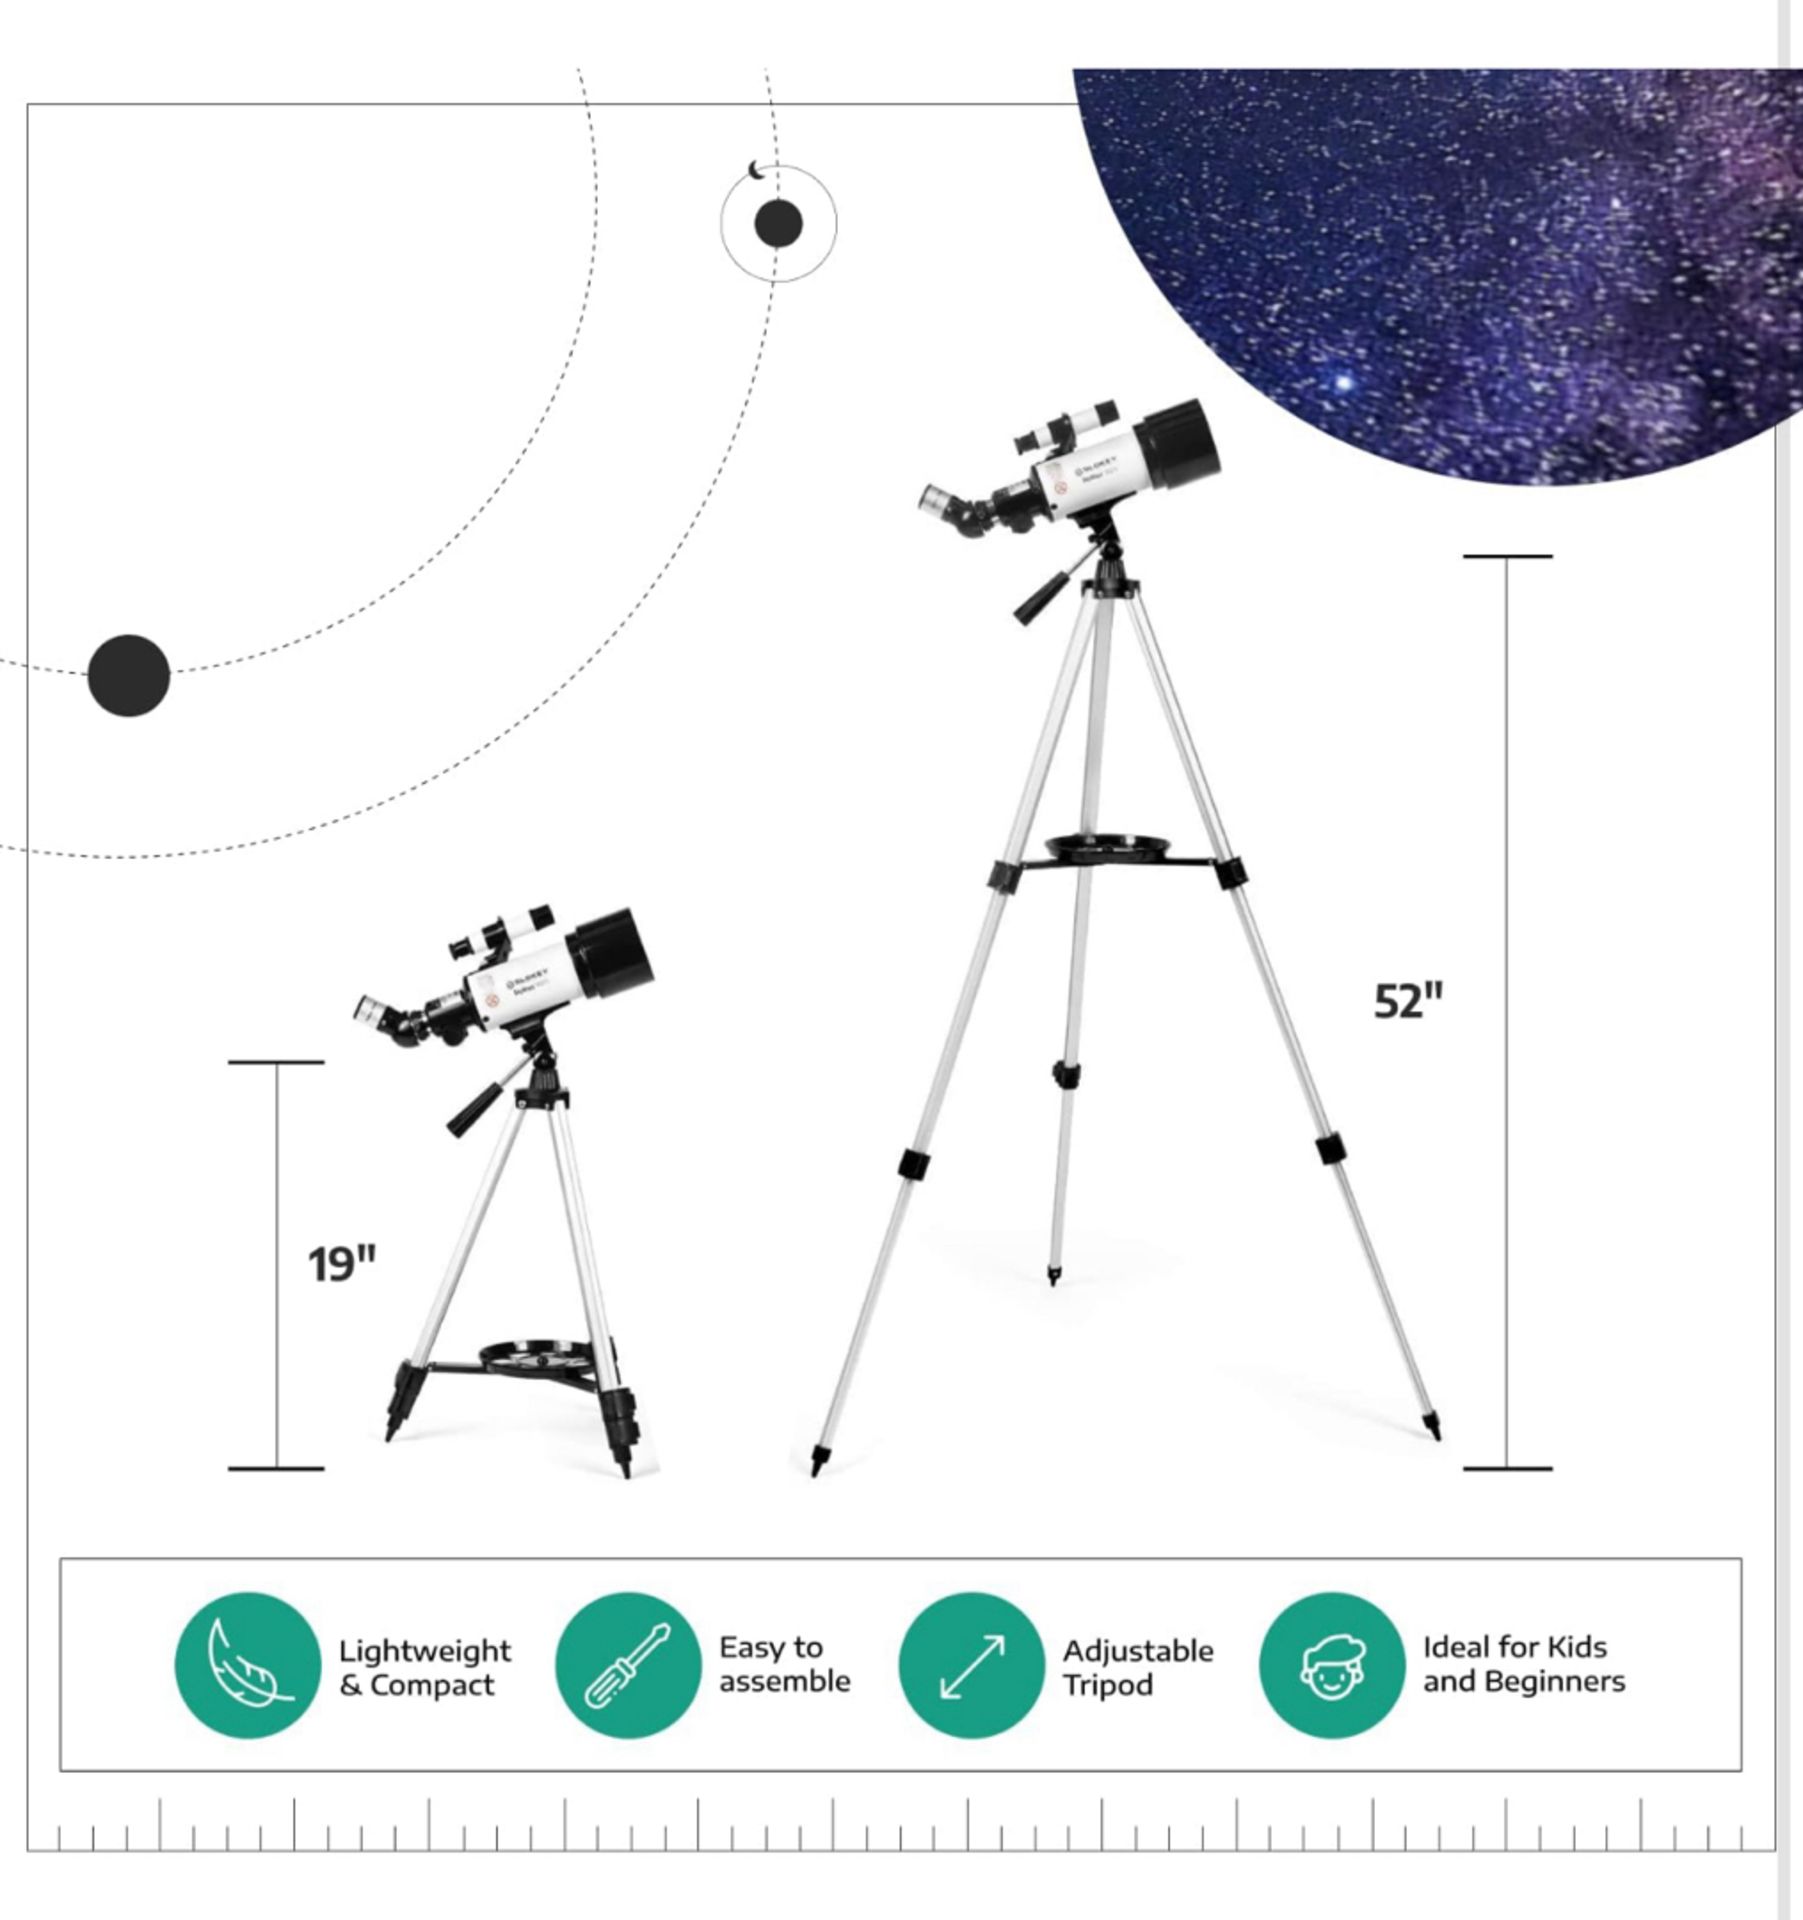 Slokey 40070 SKYWAYS TELESCOPE FOR ASTRONOMY WITH ACCESSORIES (NEW) - AMAZON PRICE Â£129.99! - Image 7 of 9